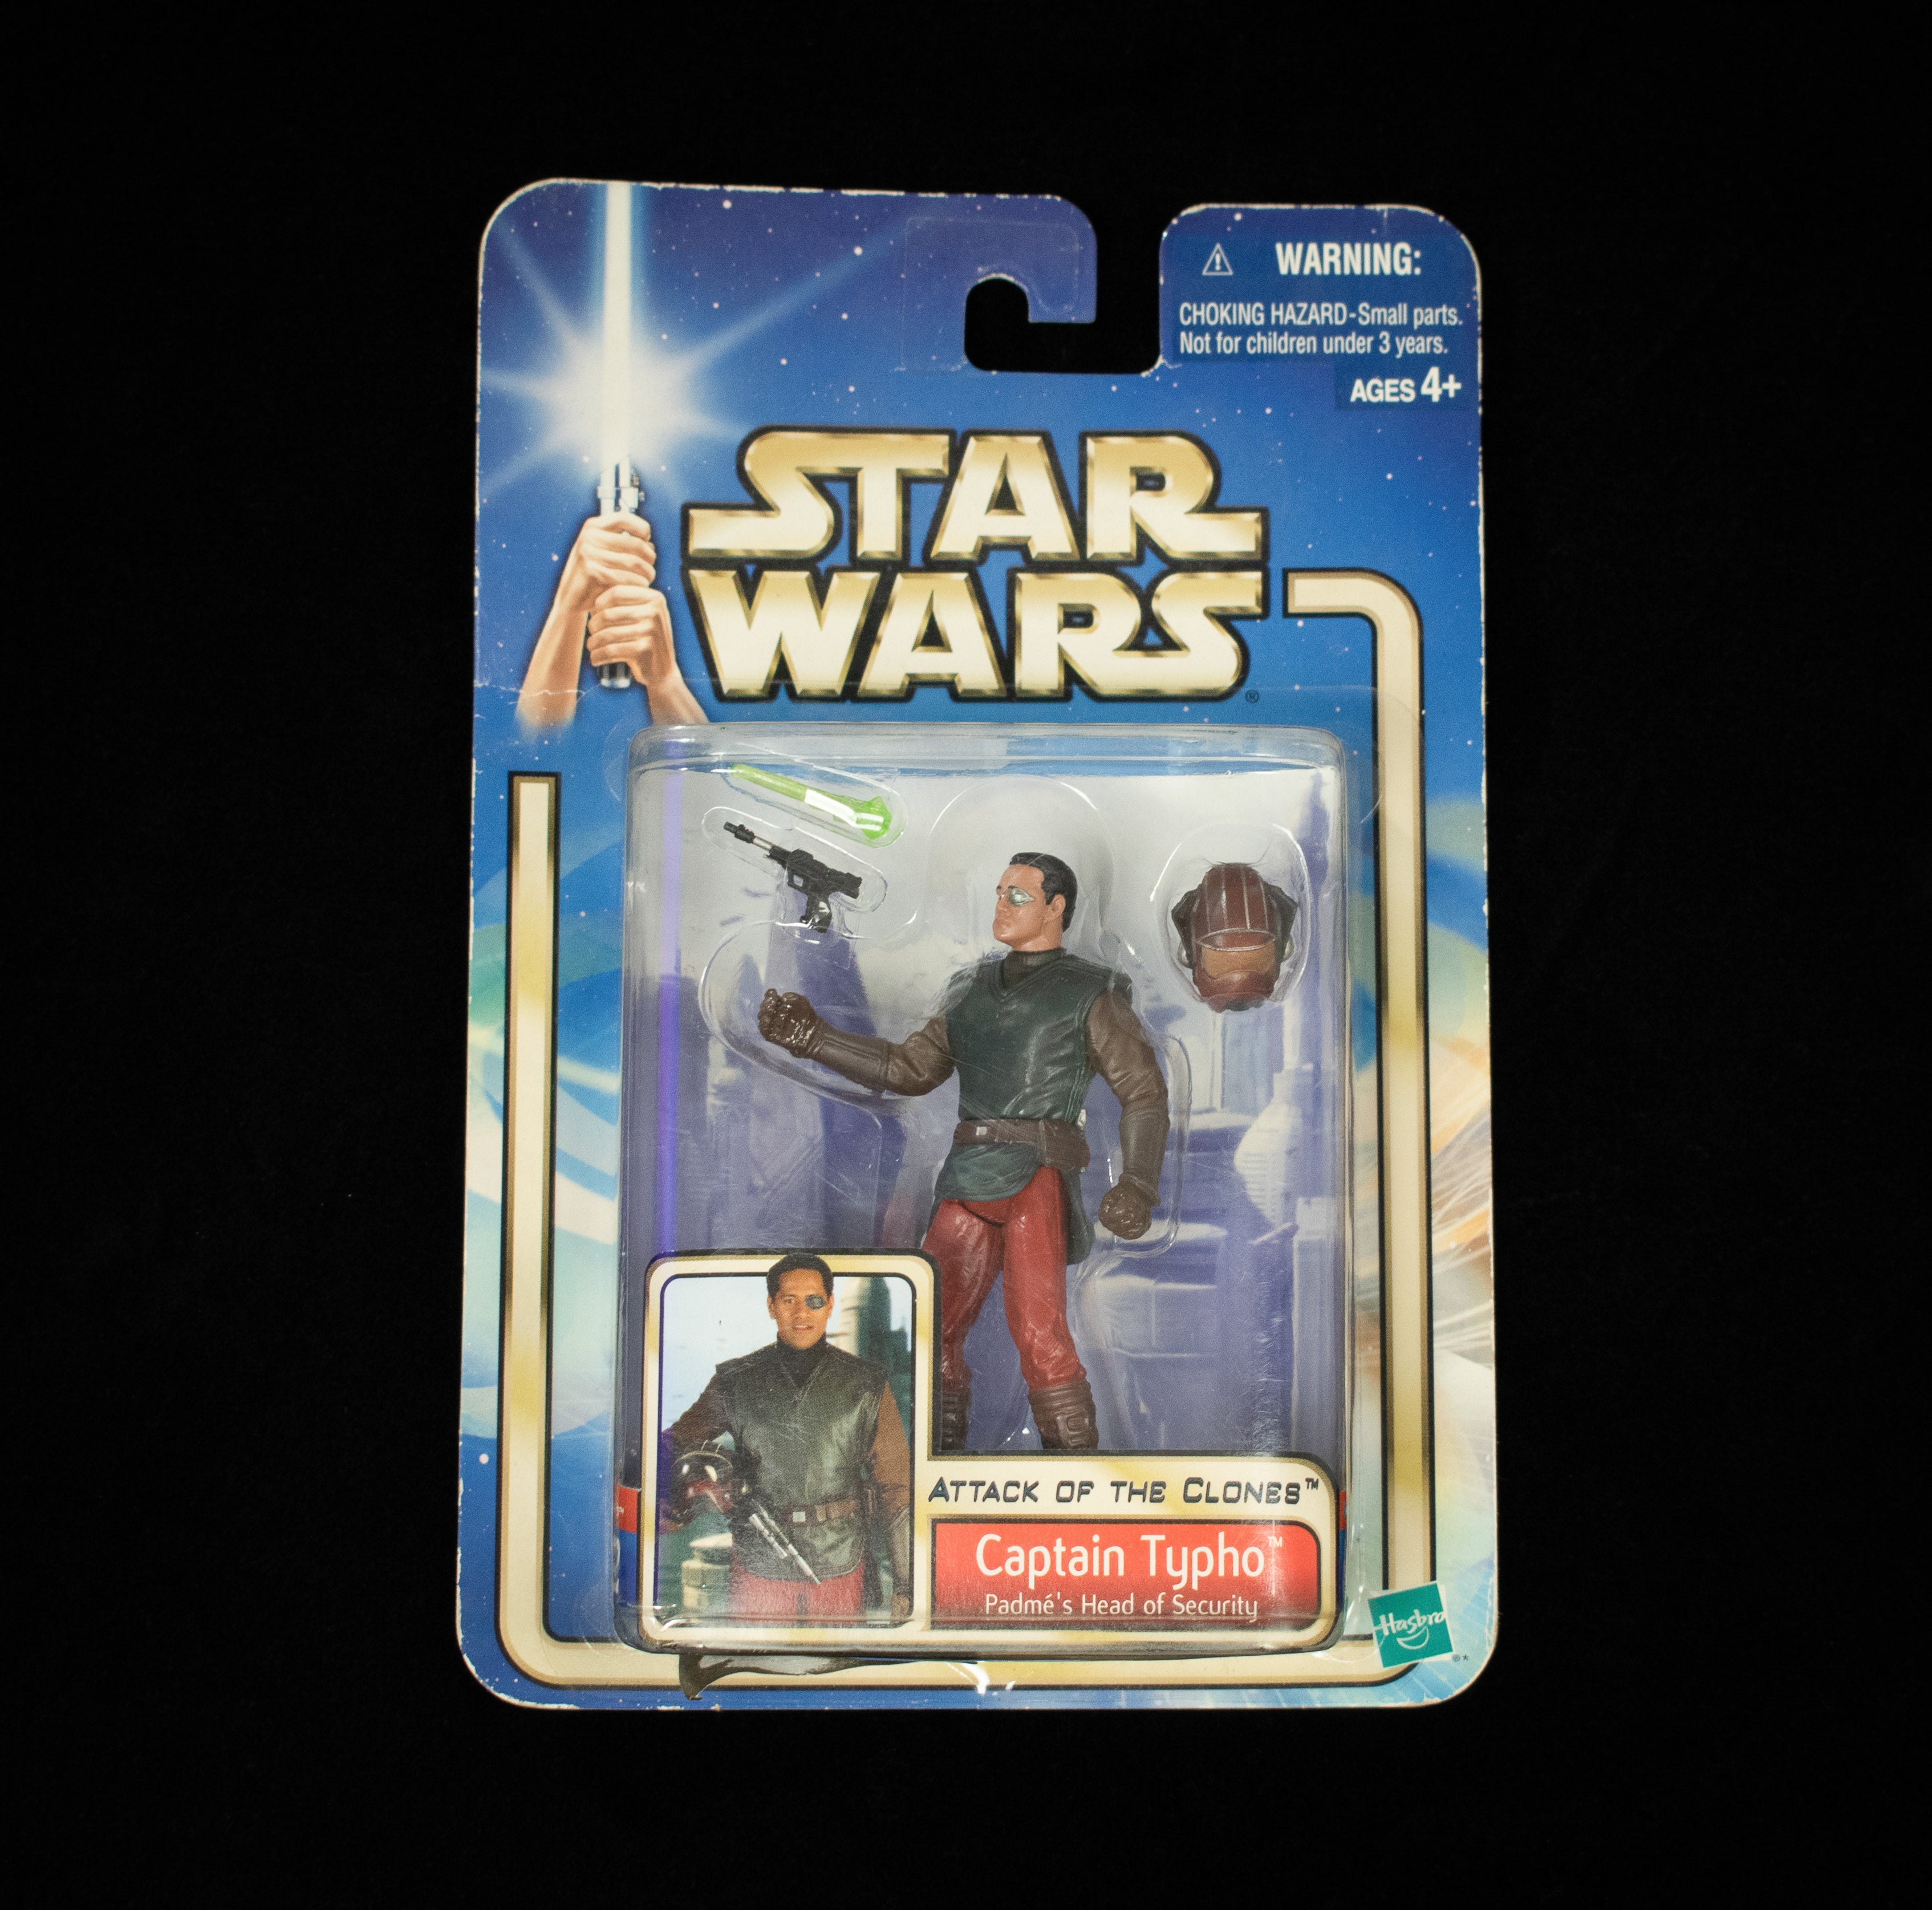 Captain Typho Padme Head of Security Star Wars Action Figure Attack of the Clone